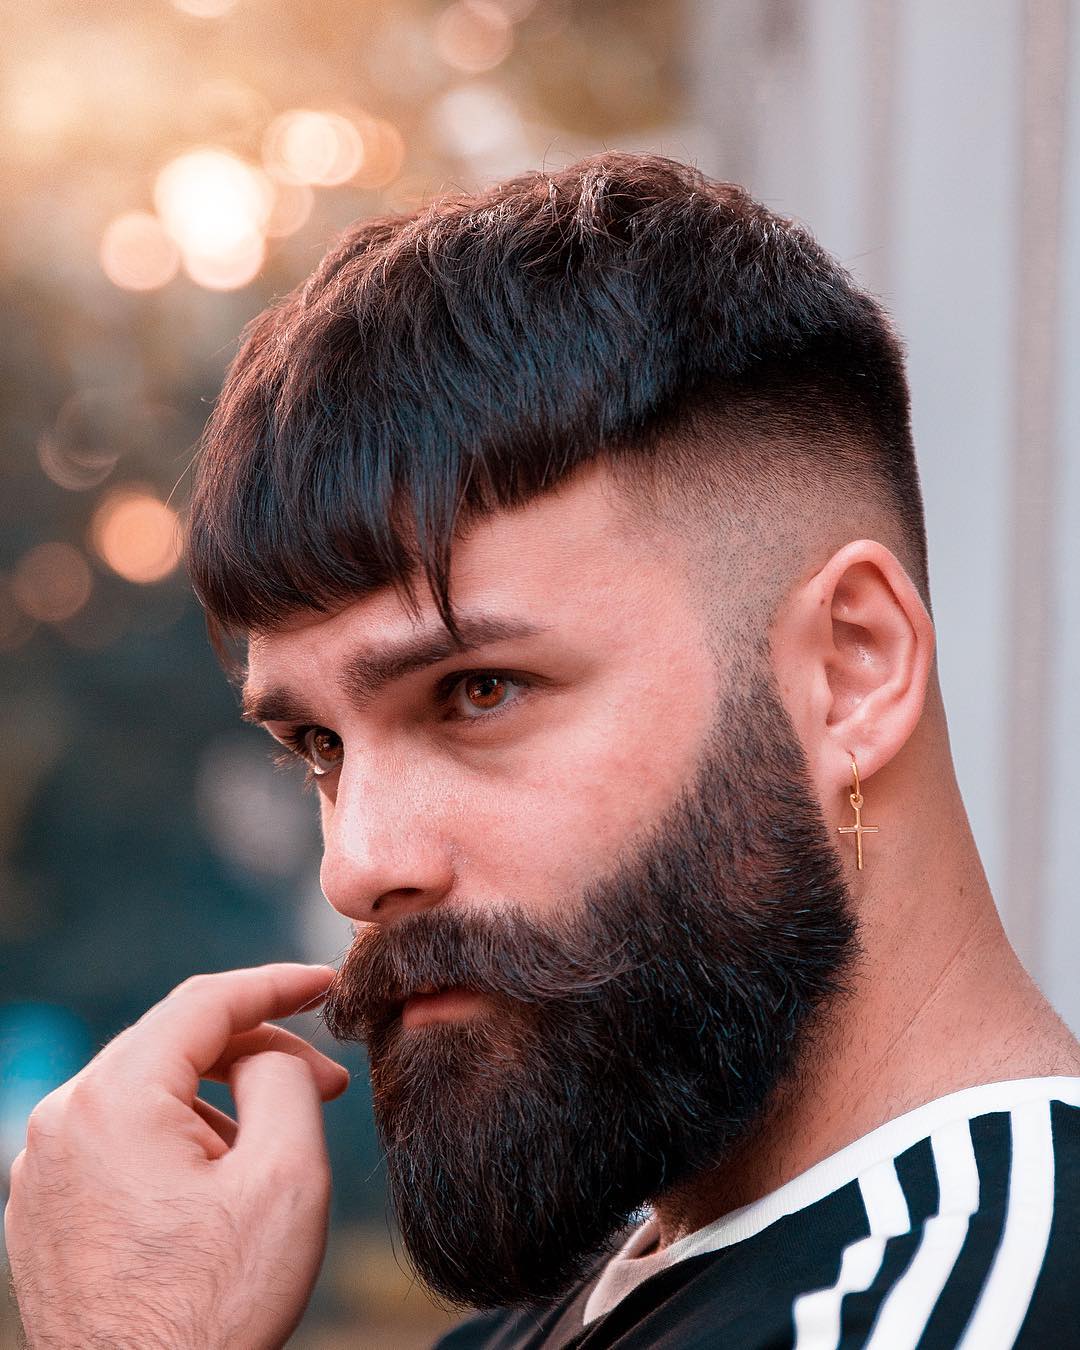 Top 10 Beard Styles For Men You Should Try WeddingWire